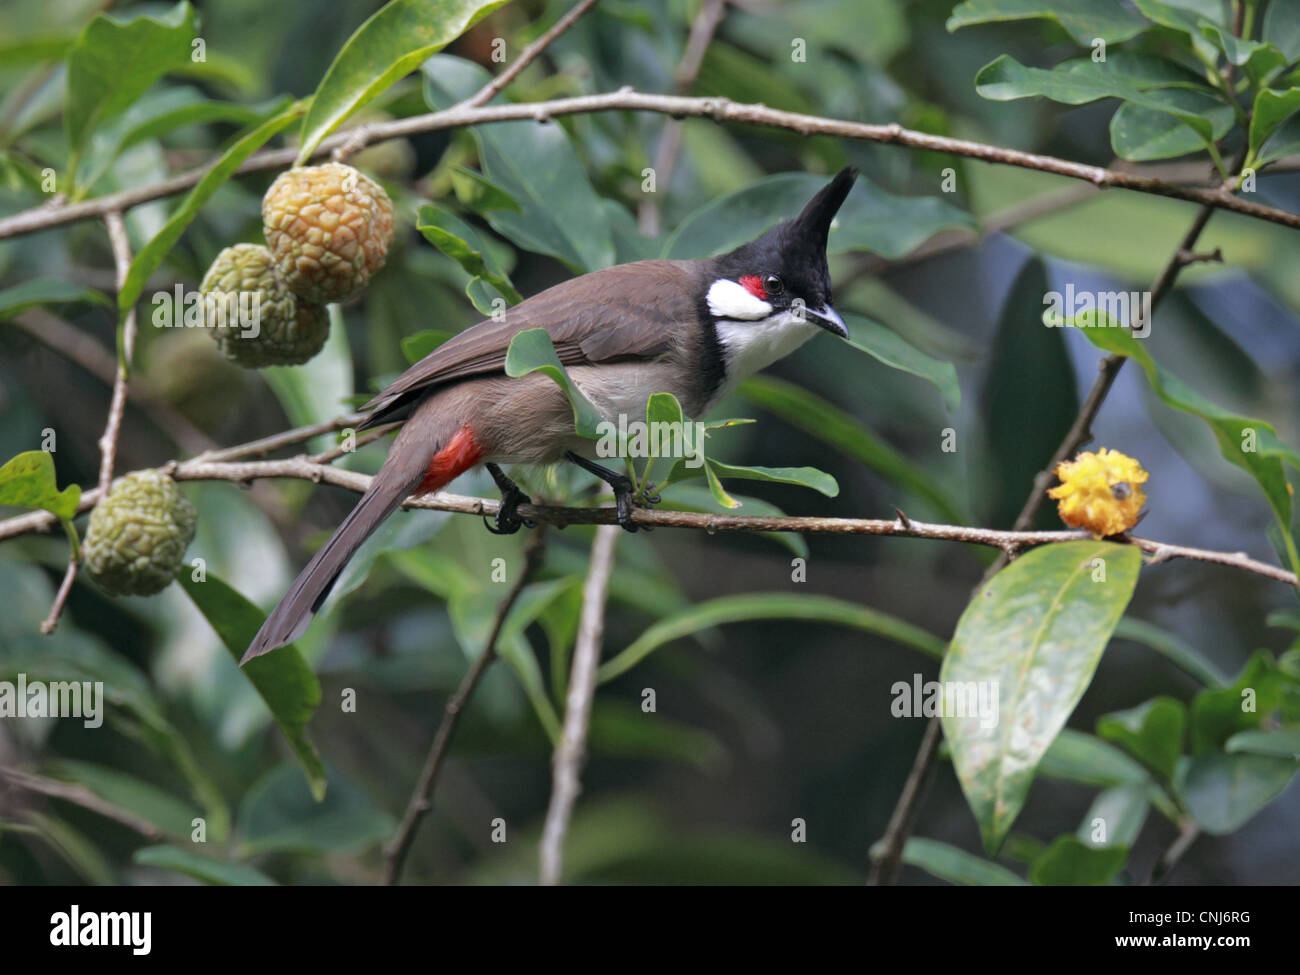 Red-whiskered Bulbul (Pycnonotus jocosus) adult, perched on twig in fruiting bush, Hong Kong, China, march Stock Photo